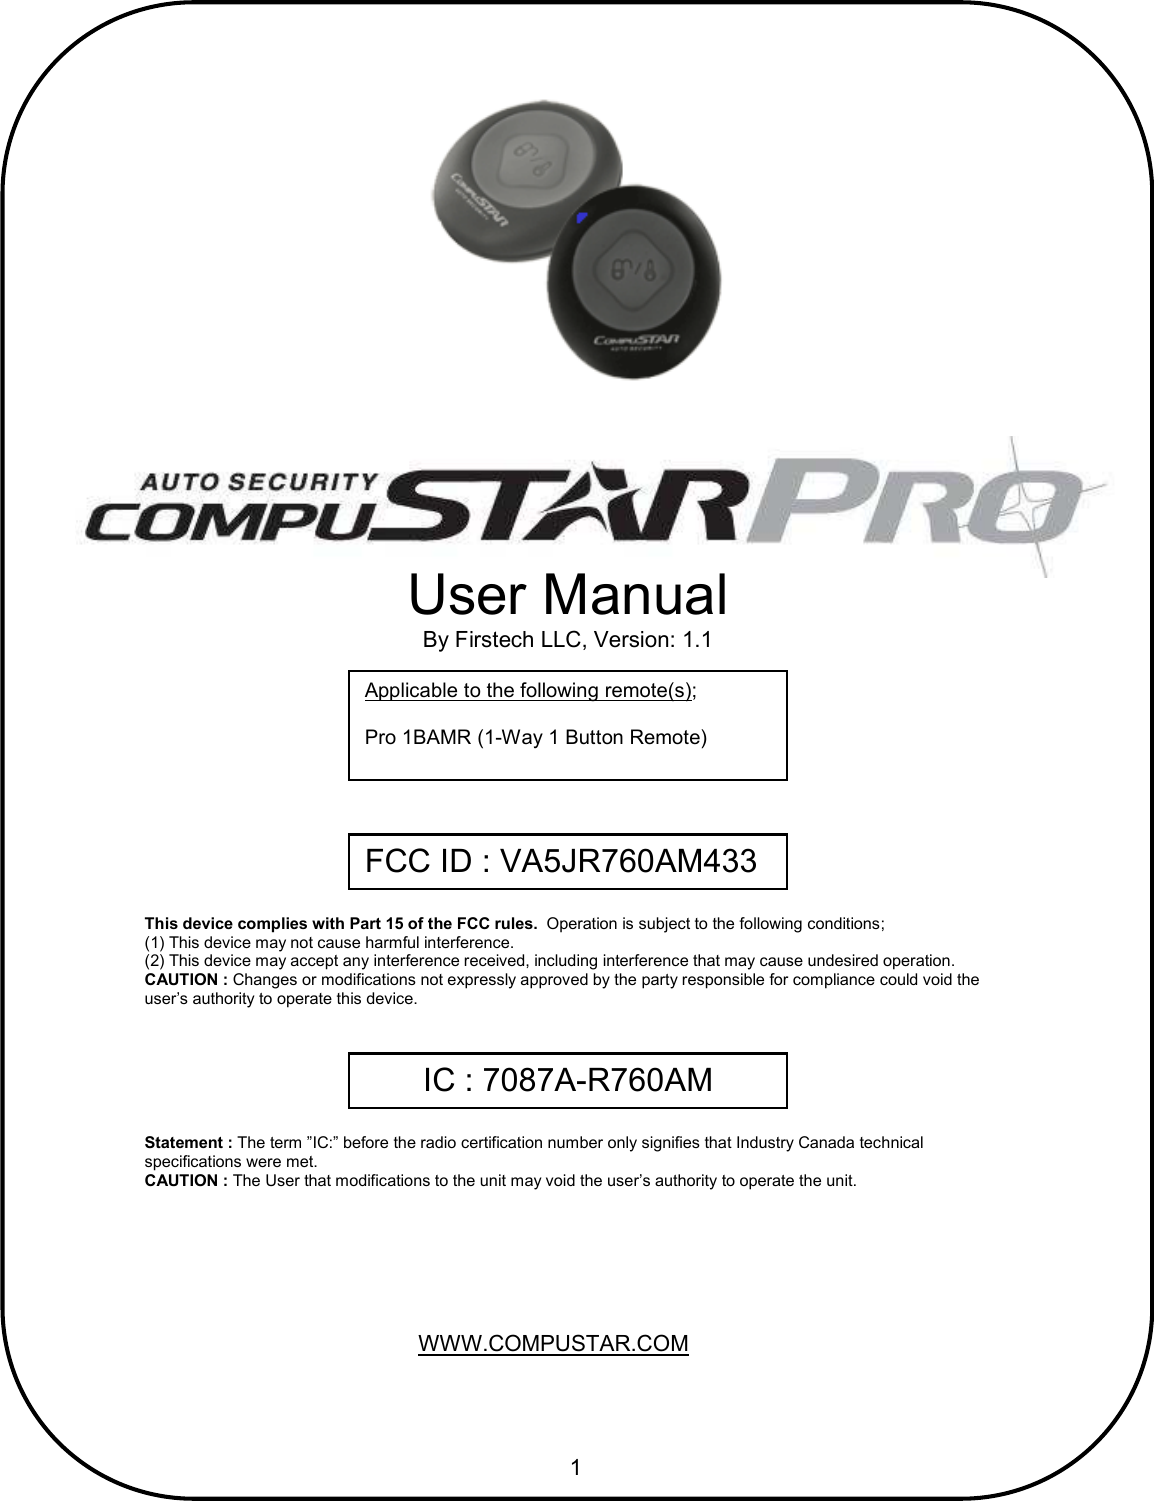       1                                         User Manual By Firstech LLC, Version: 1.1 Applicable to the following remote(s);  Pro 1BAMR (1-Way 1 Button Remote) This device complies with Part 15 of the FCC rules.  Operation is subject to the following conditions; (1) This device may not cause harmful interference. (2) This device may accept any interference received, including interference that may cause undesired operation. CAUTION : Changes or modifications not expressly approved by the party responsible for compliance could void the user’s authority to operate this device. WWW.COMPUSTAR.COM FCC ID : VA5JR760AM433 IC : 7087A-R760AM Statement : The term ”IC:” before the radio certification number only signifies that Industry Canada technical  specifications were met. CAUTION : The User that modifications to the unit may void the user’s authority to operate the unit. 